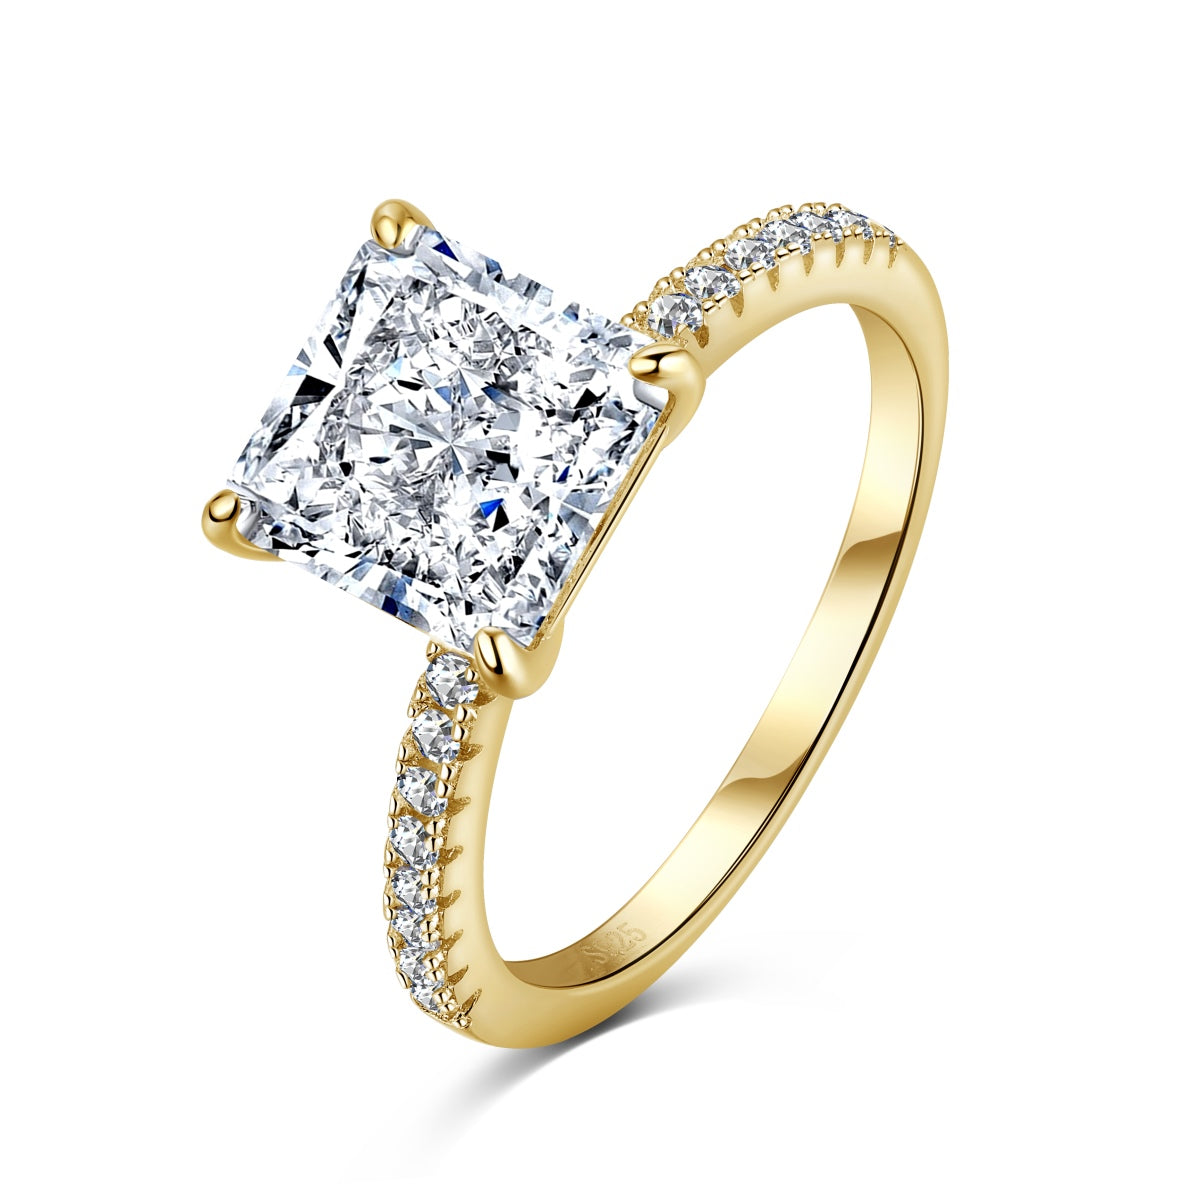 18k Gold Plated Princess Cut ‘Iris’ Ring (Limited Edition)